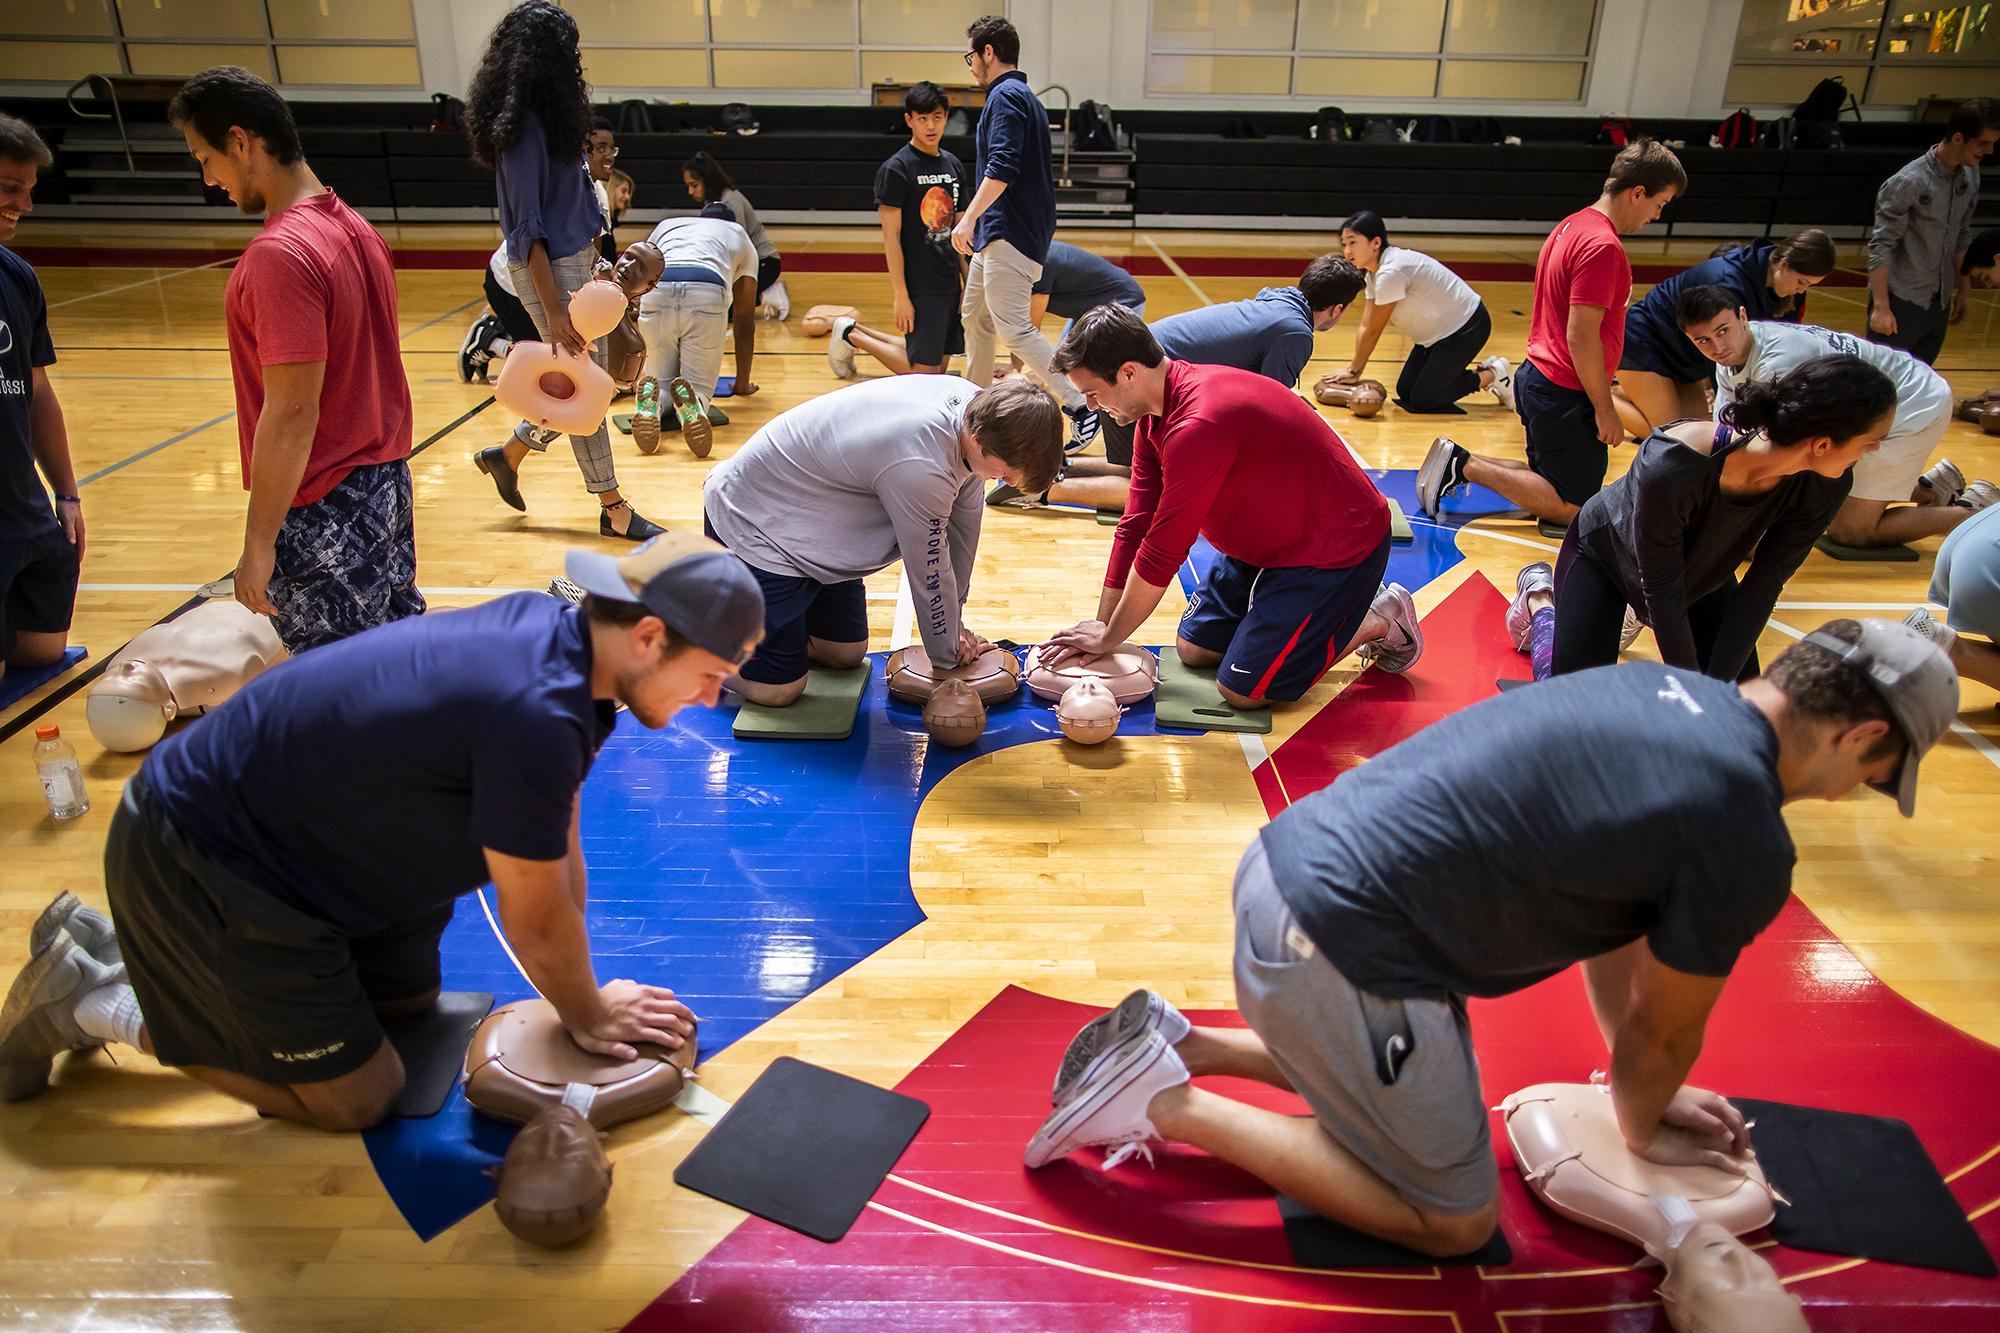 Students performing CPR on mannequins on a gymnasium floor.